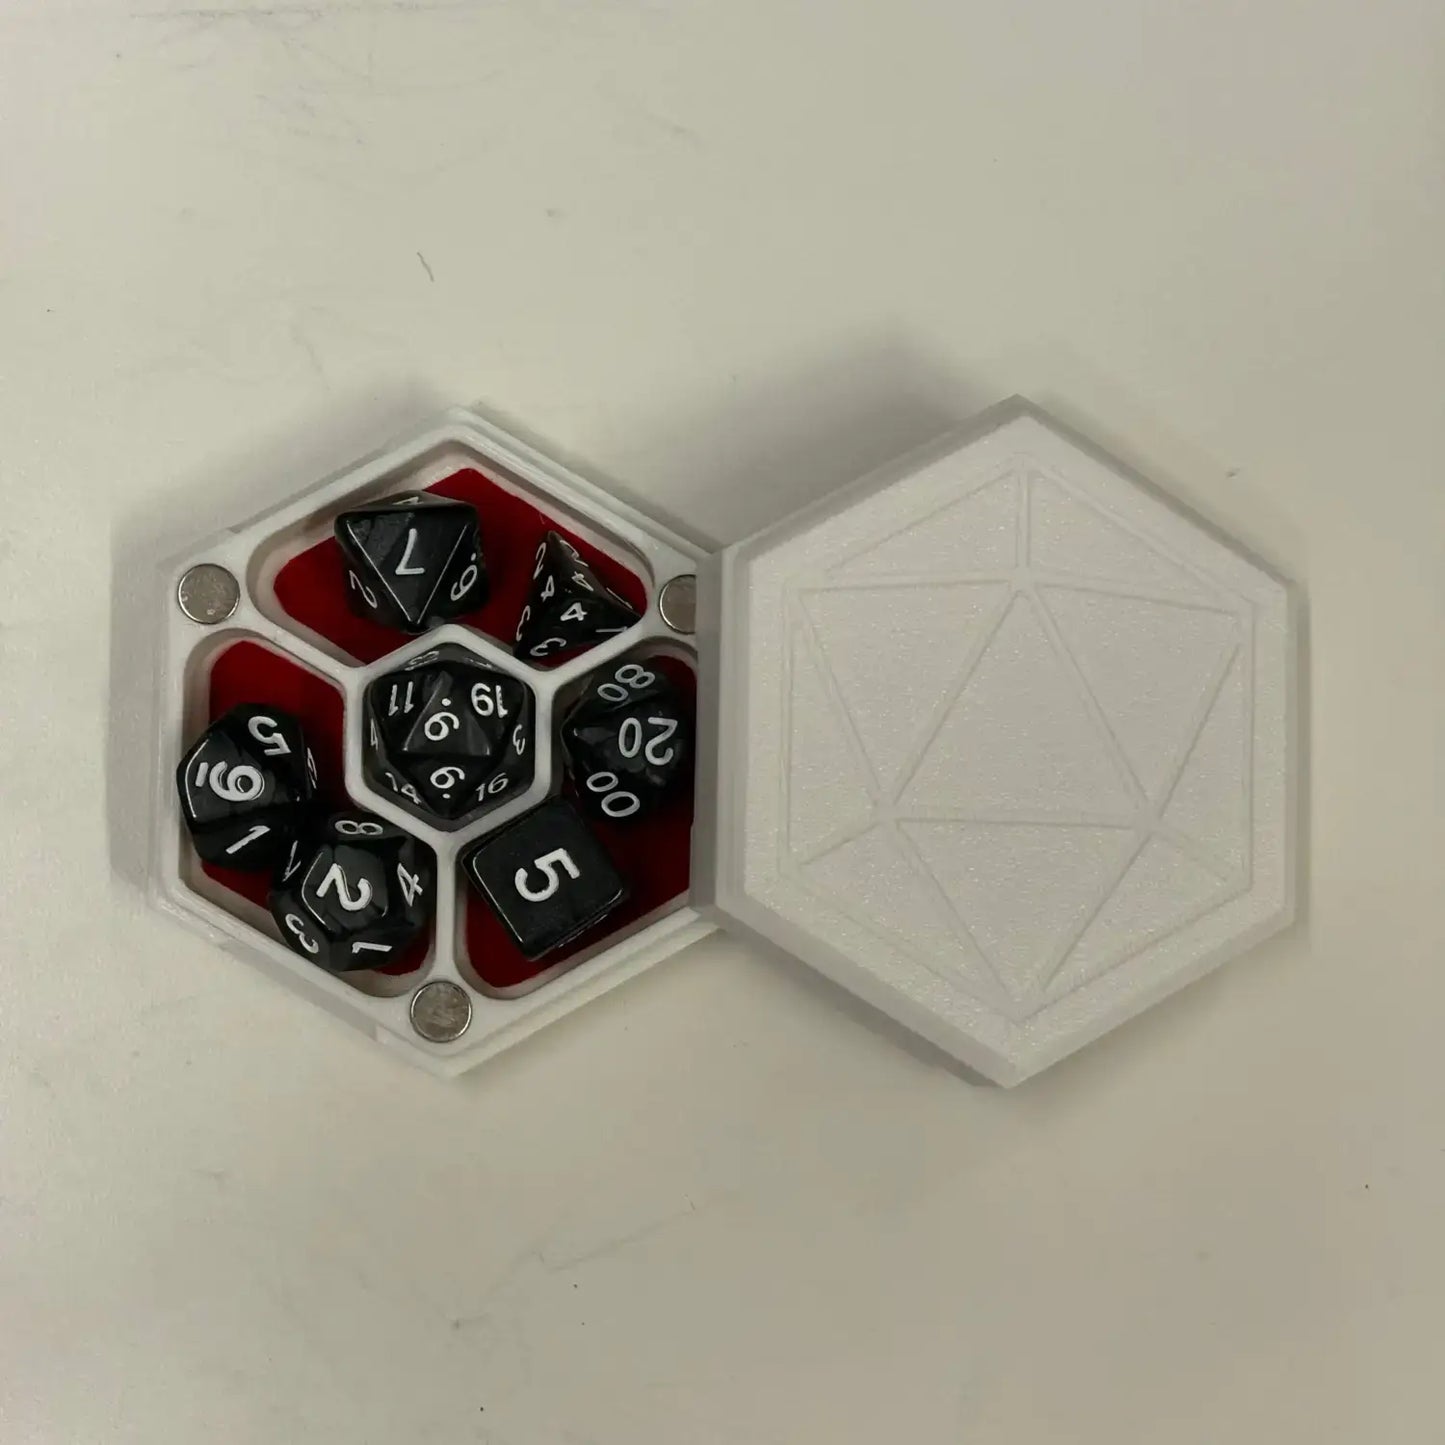 Felt lined Dice Box for DnD or table top games - White Case